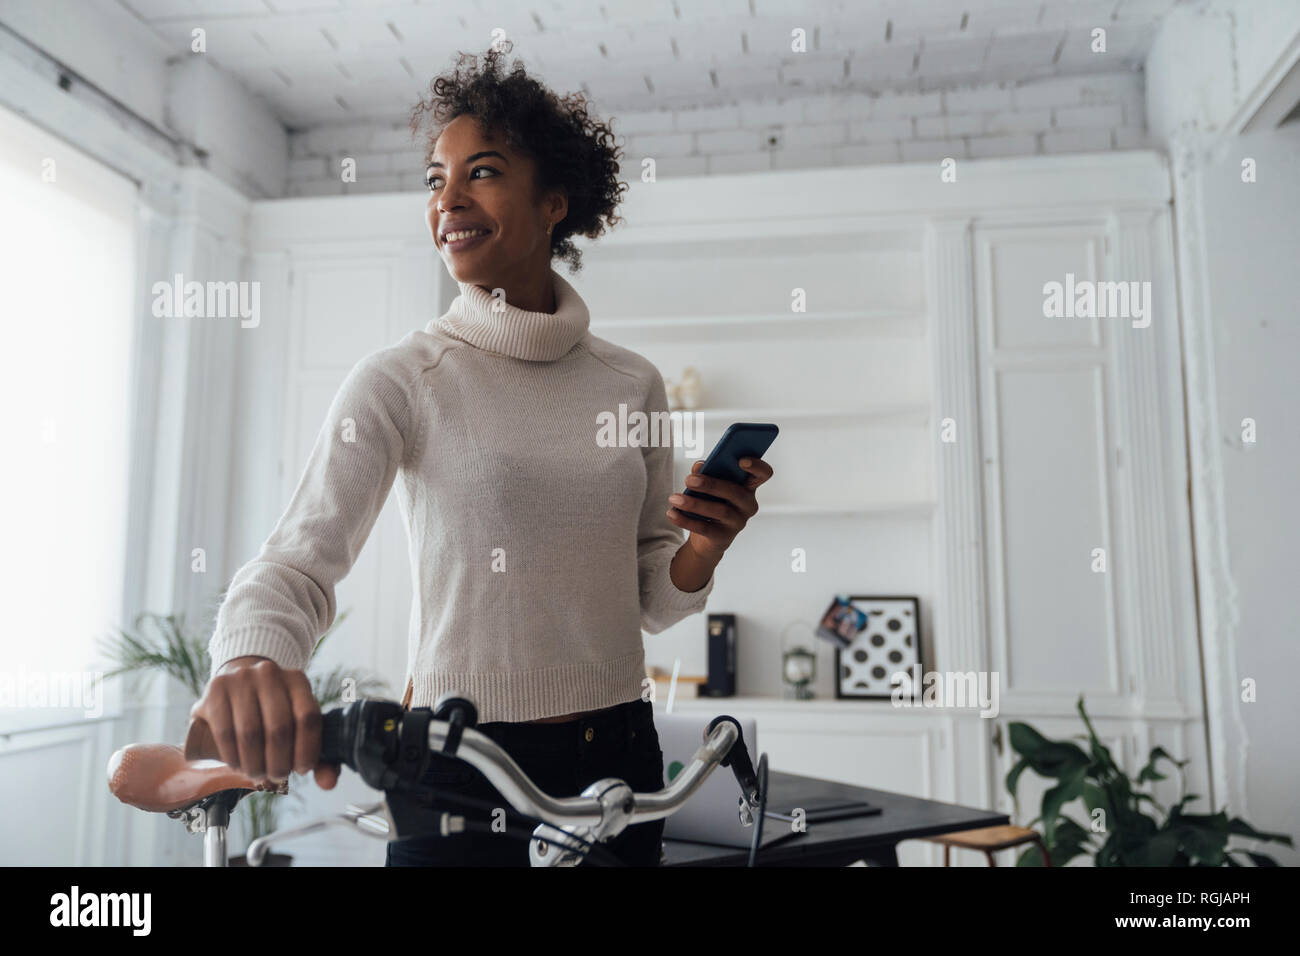 Mid adult woman leaving her home office, pushing bicycle, using smartphone Stock Photo